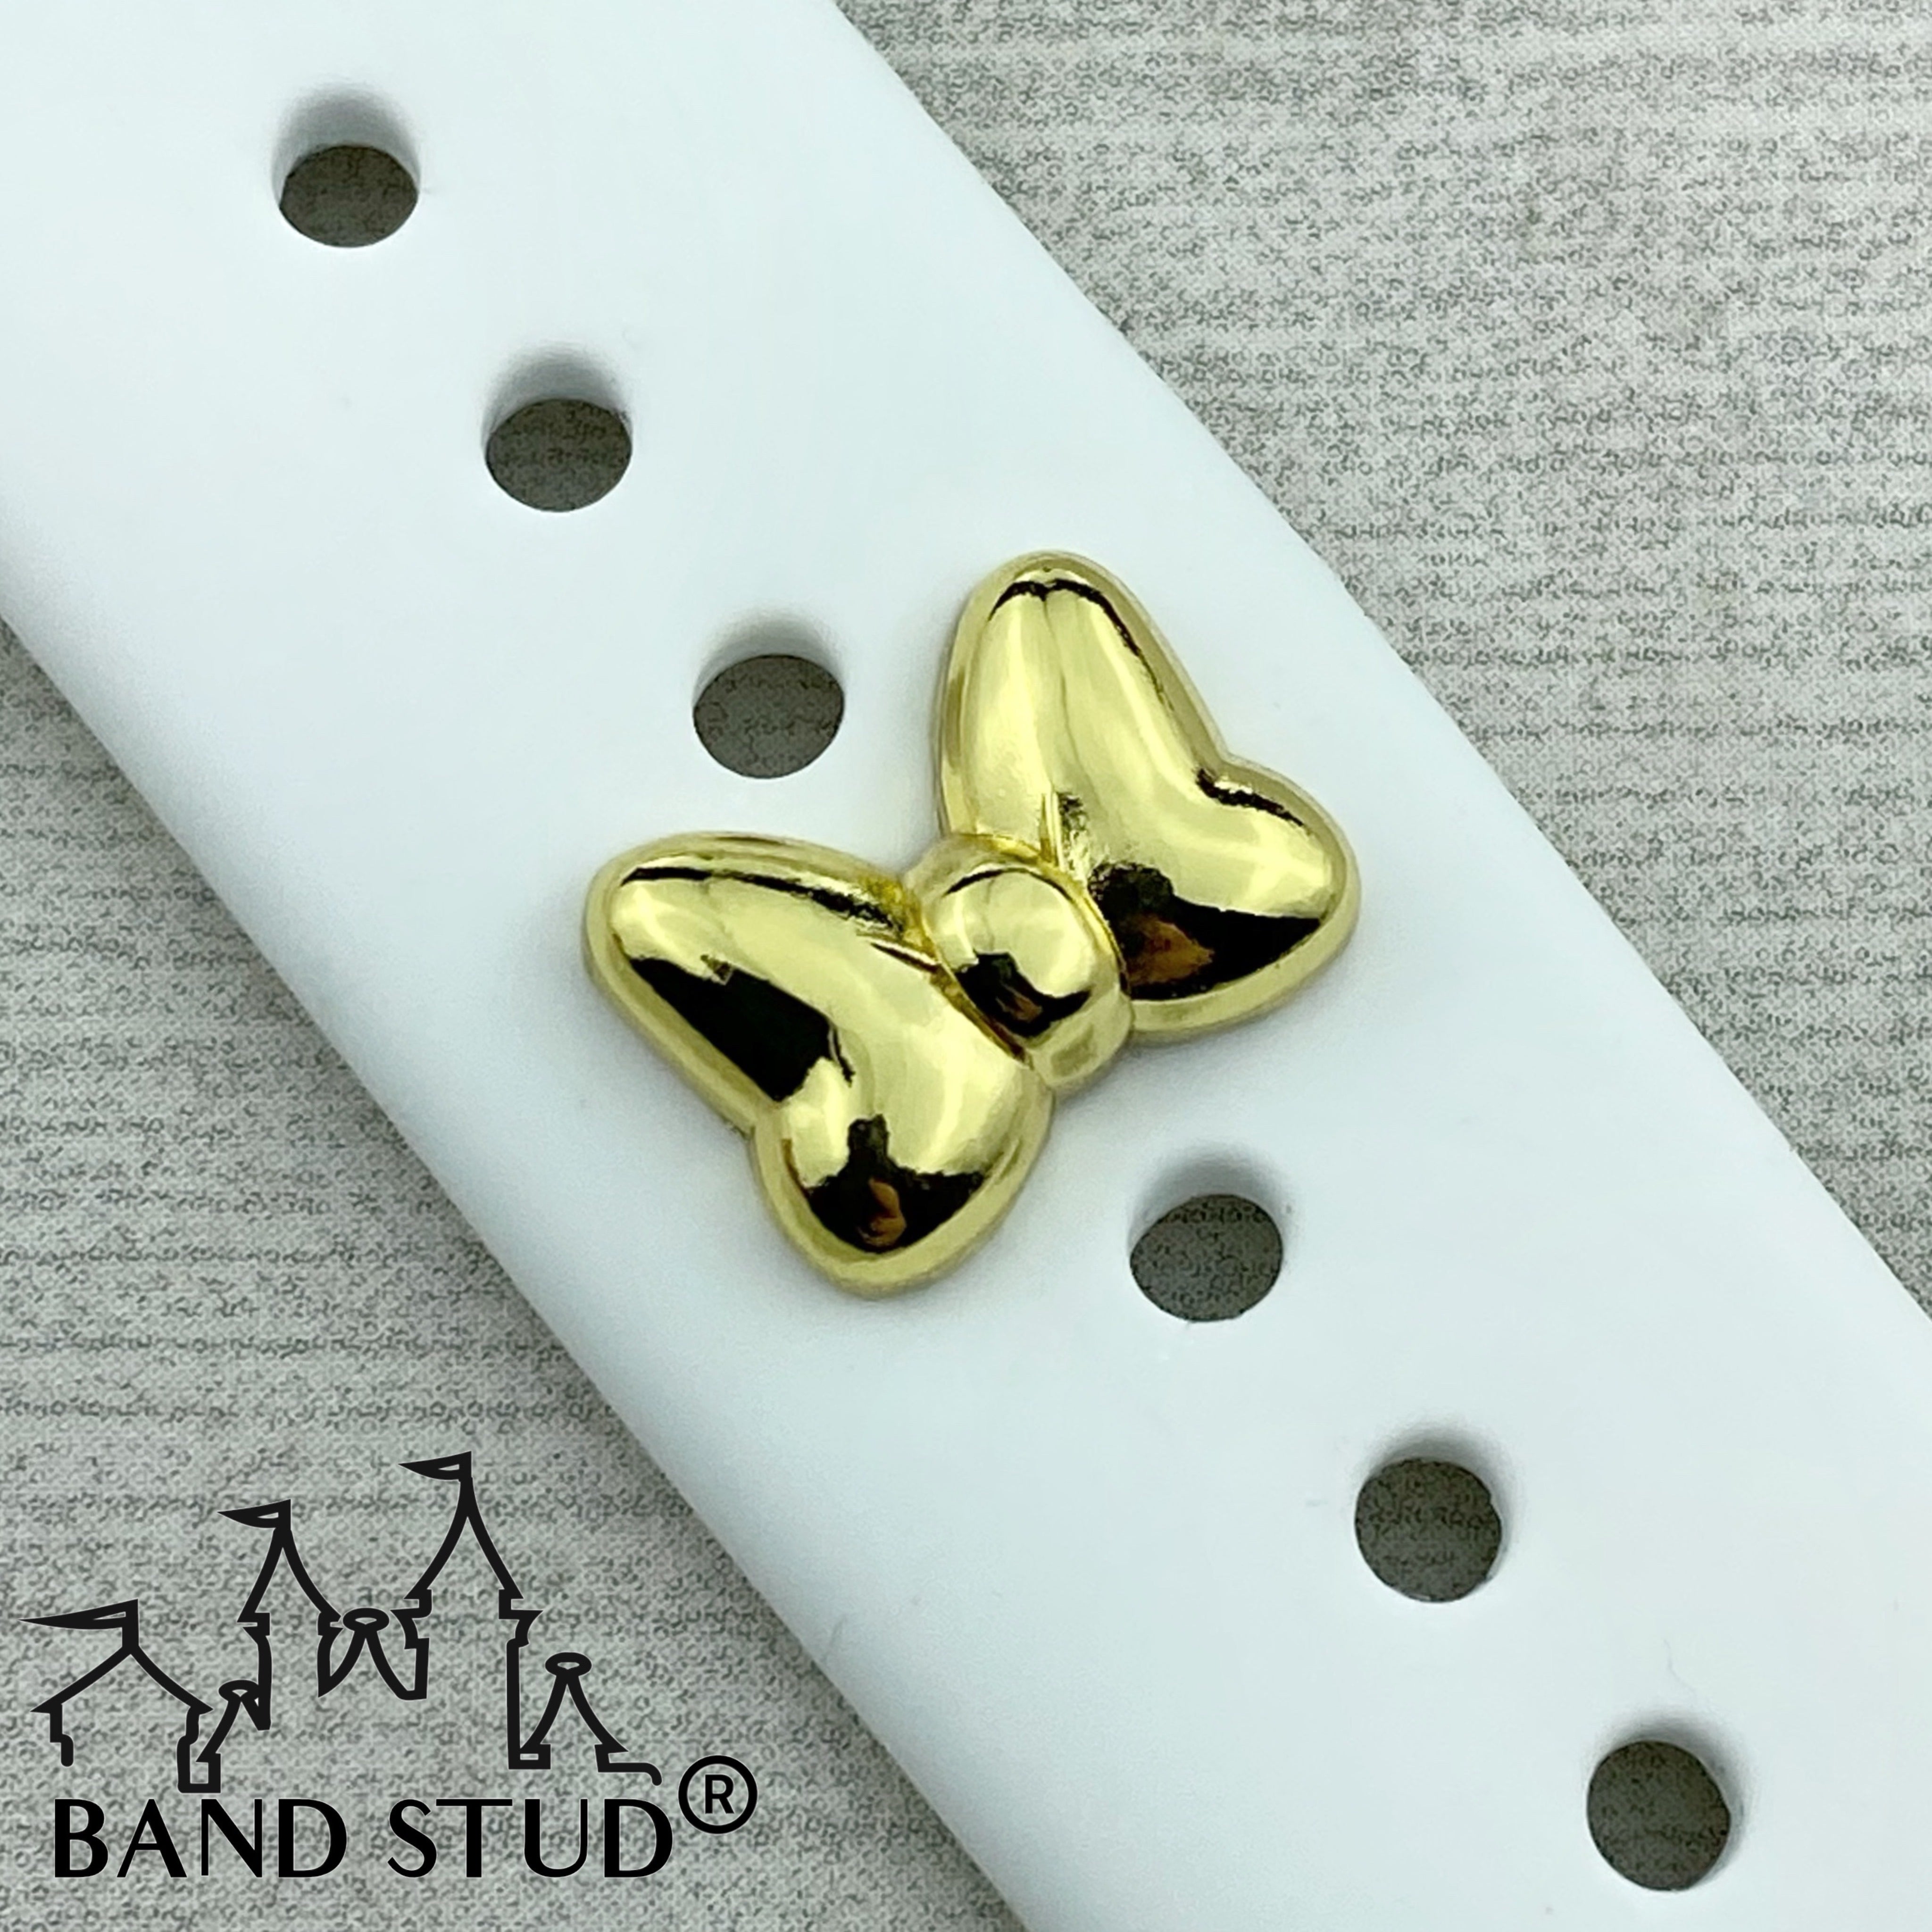 Band Stud® - It's all about the Bow (V2)